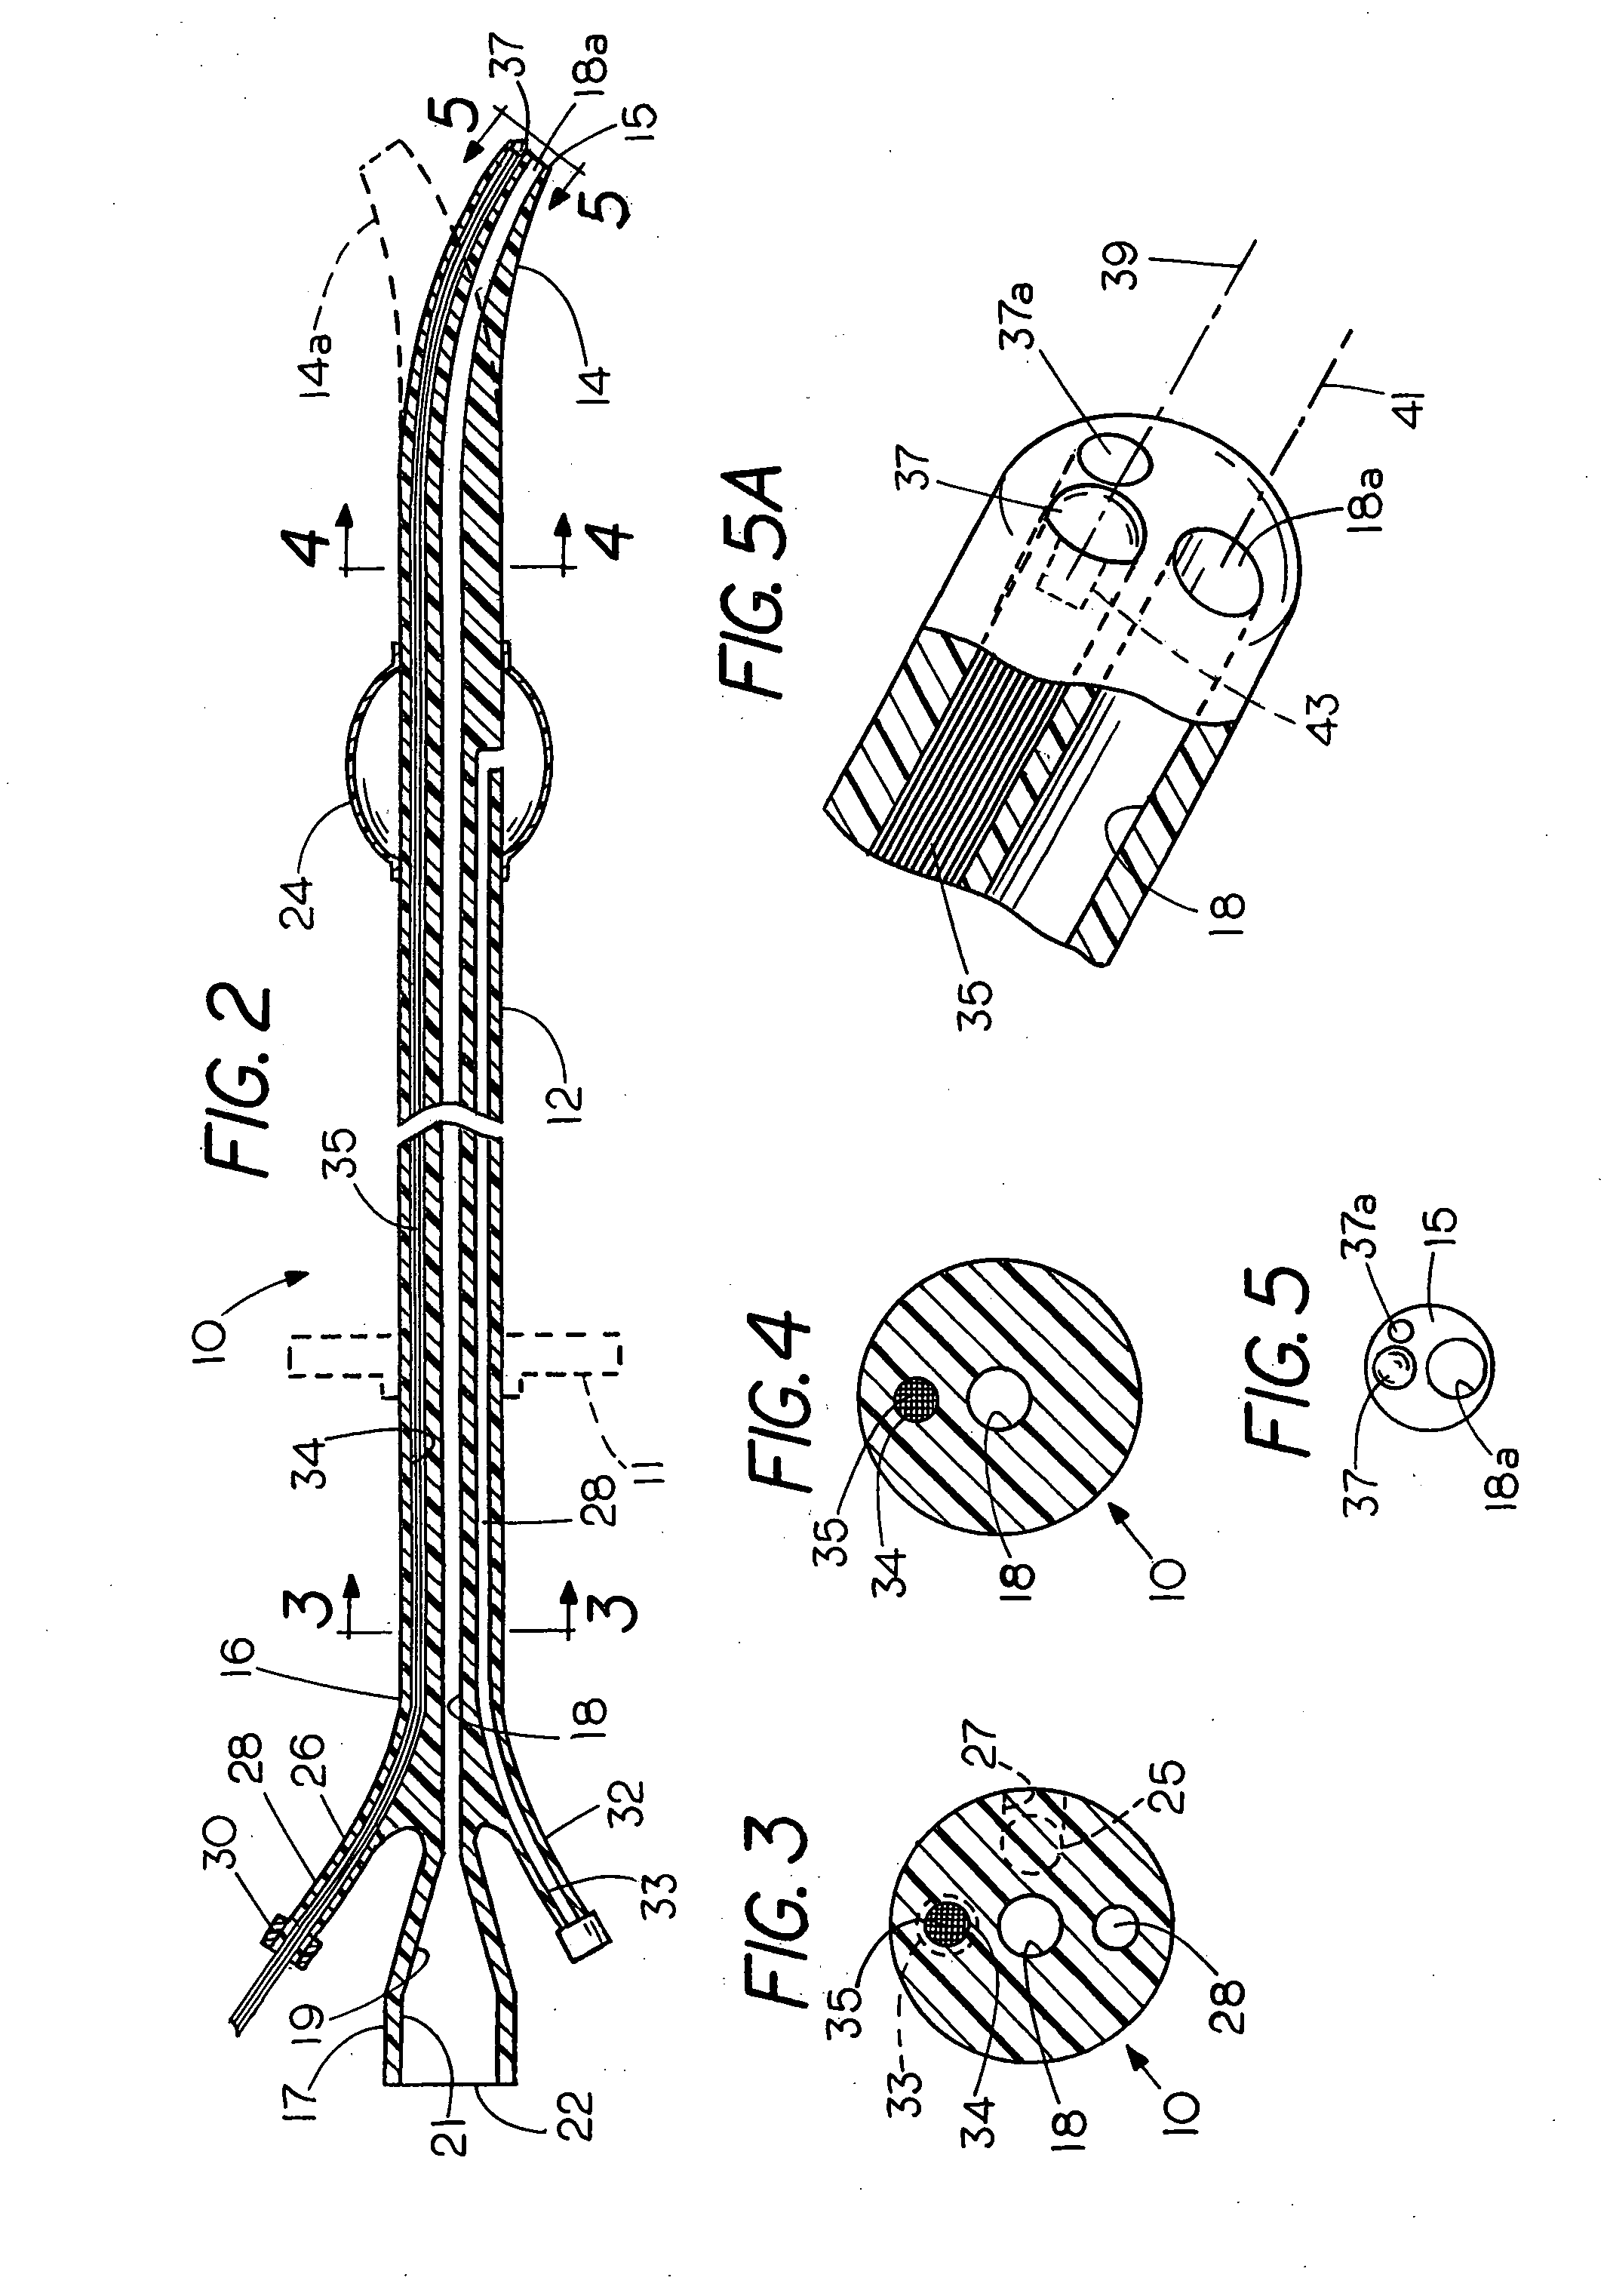 Flexible visually directed medical intubation instrument and method